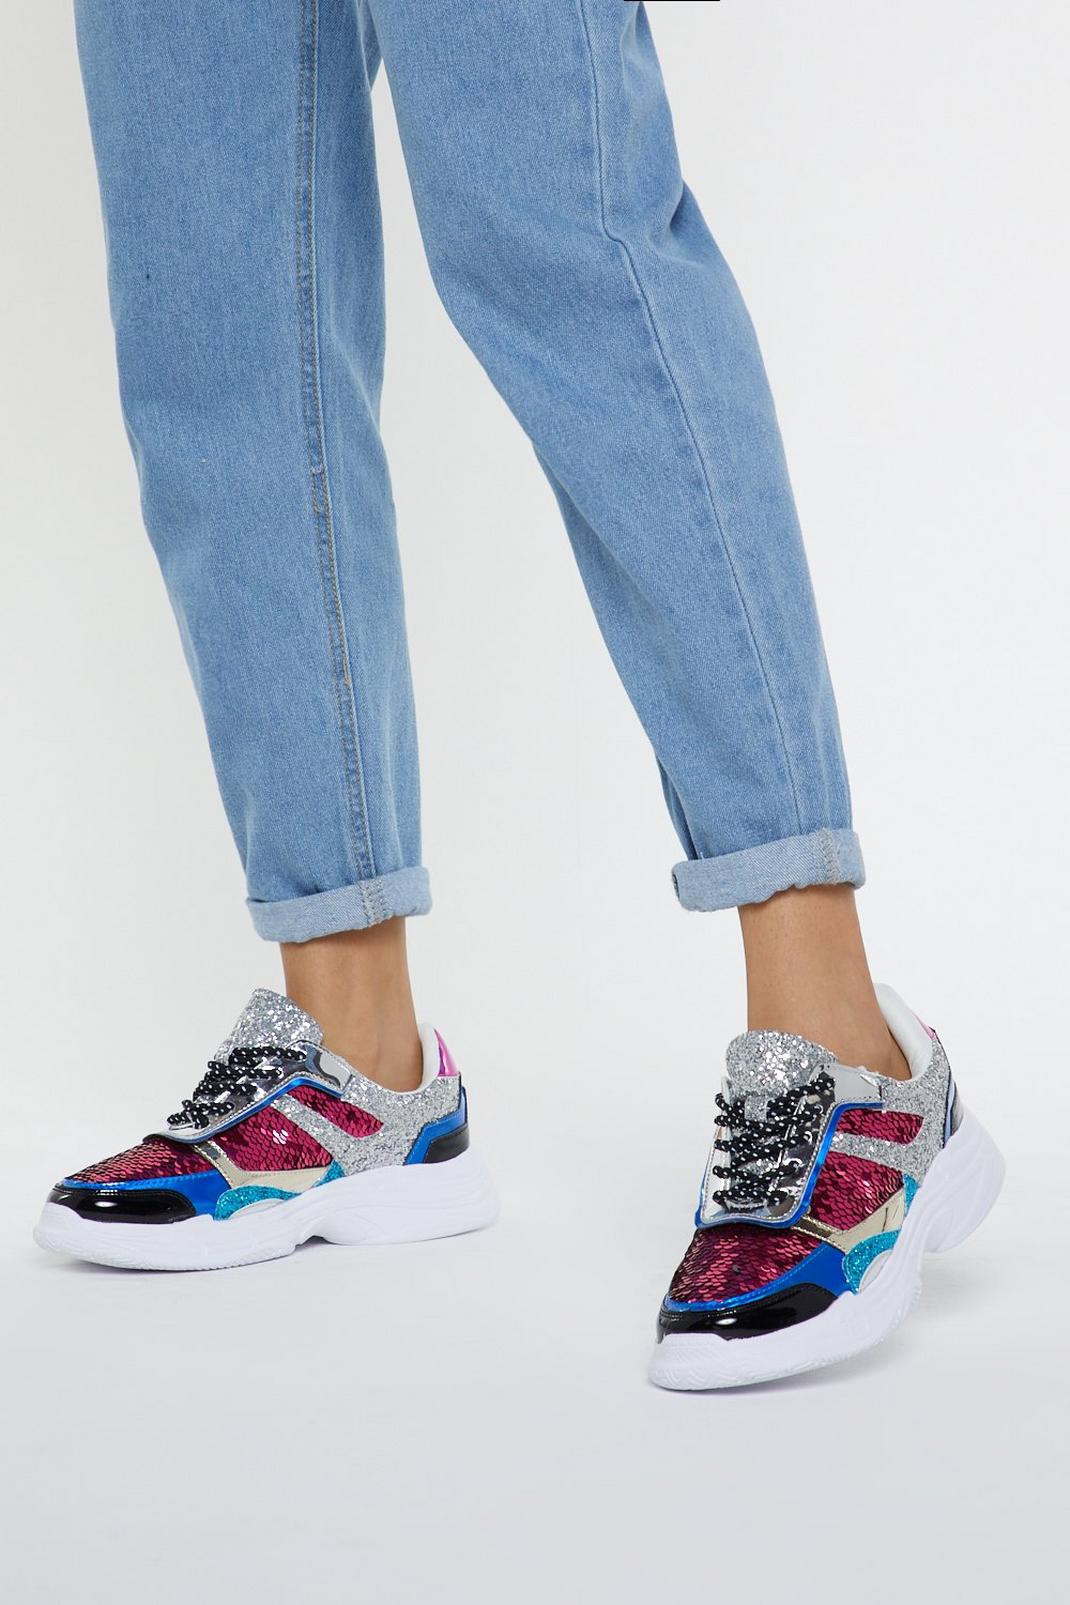 The Magnificant Dance Sequin Sneakers | Nasty Gal